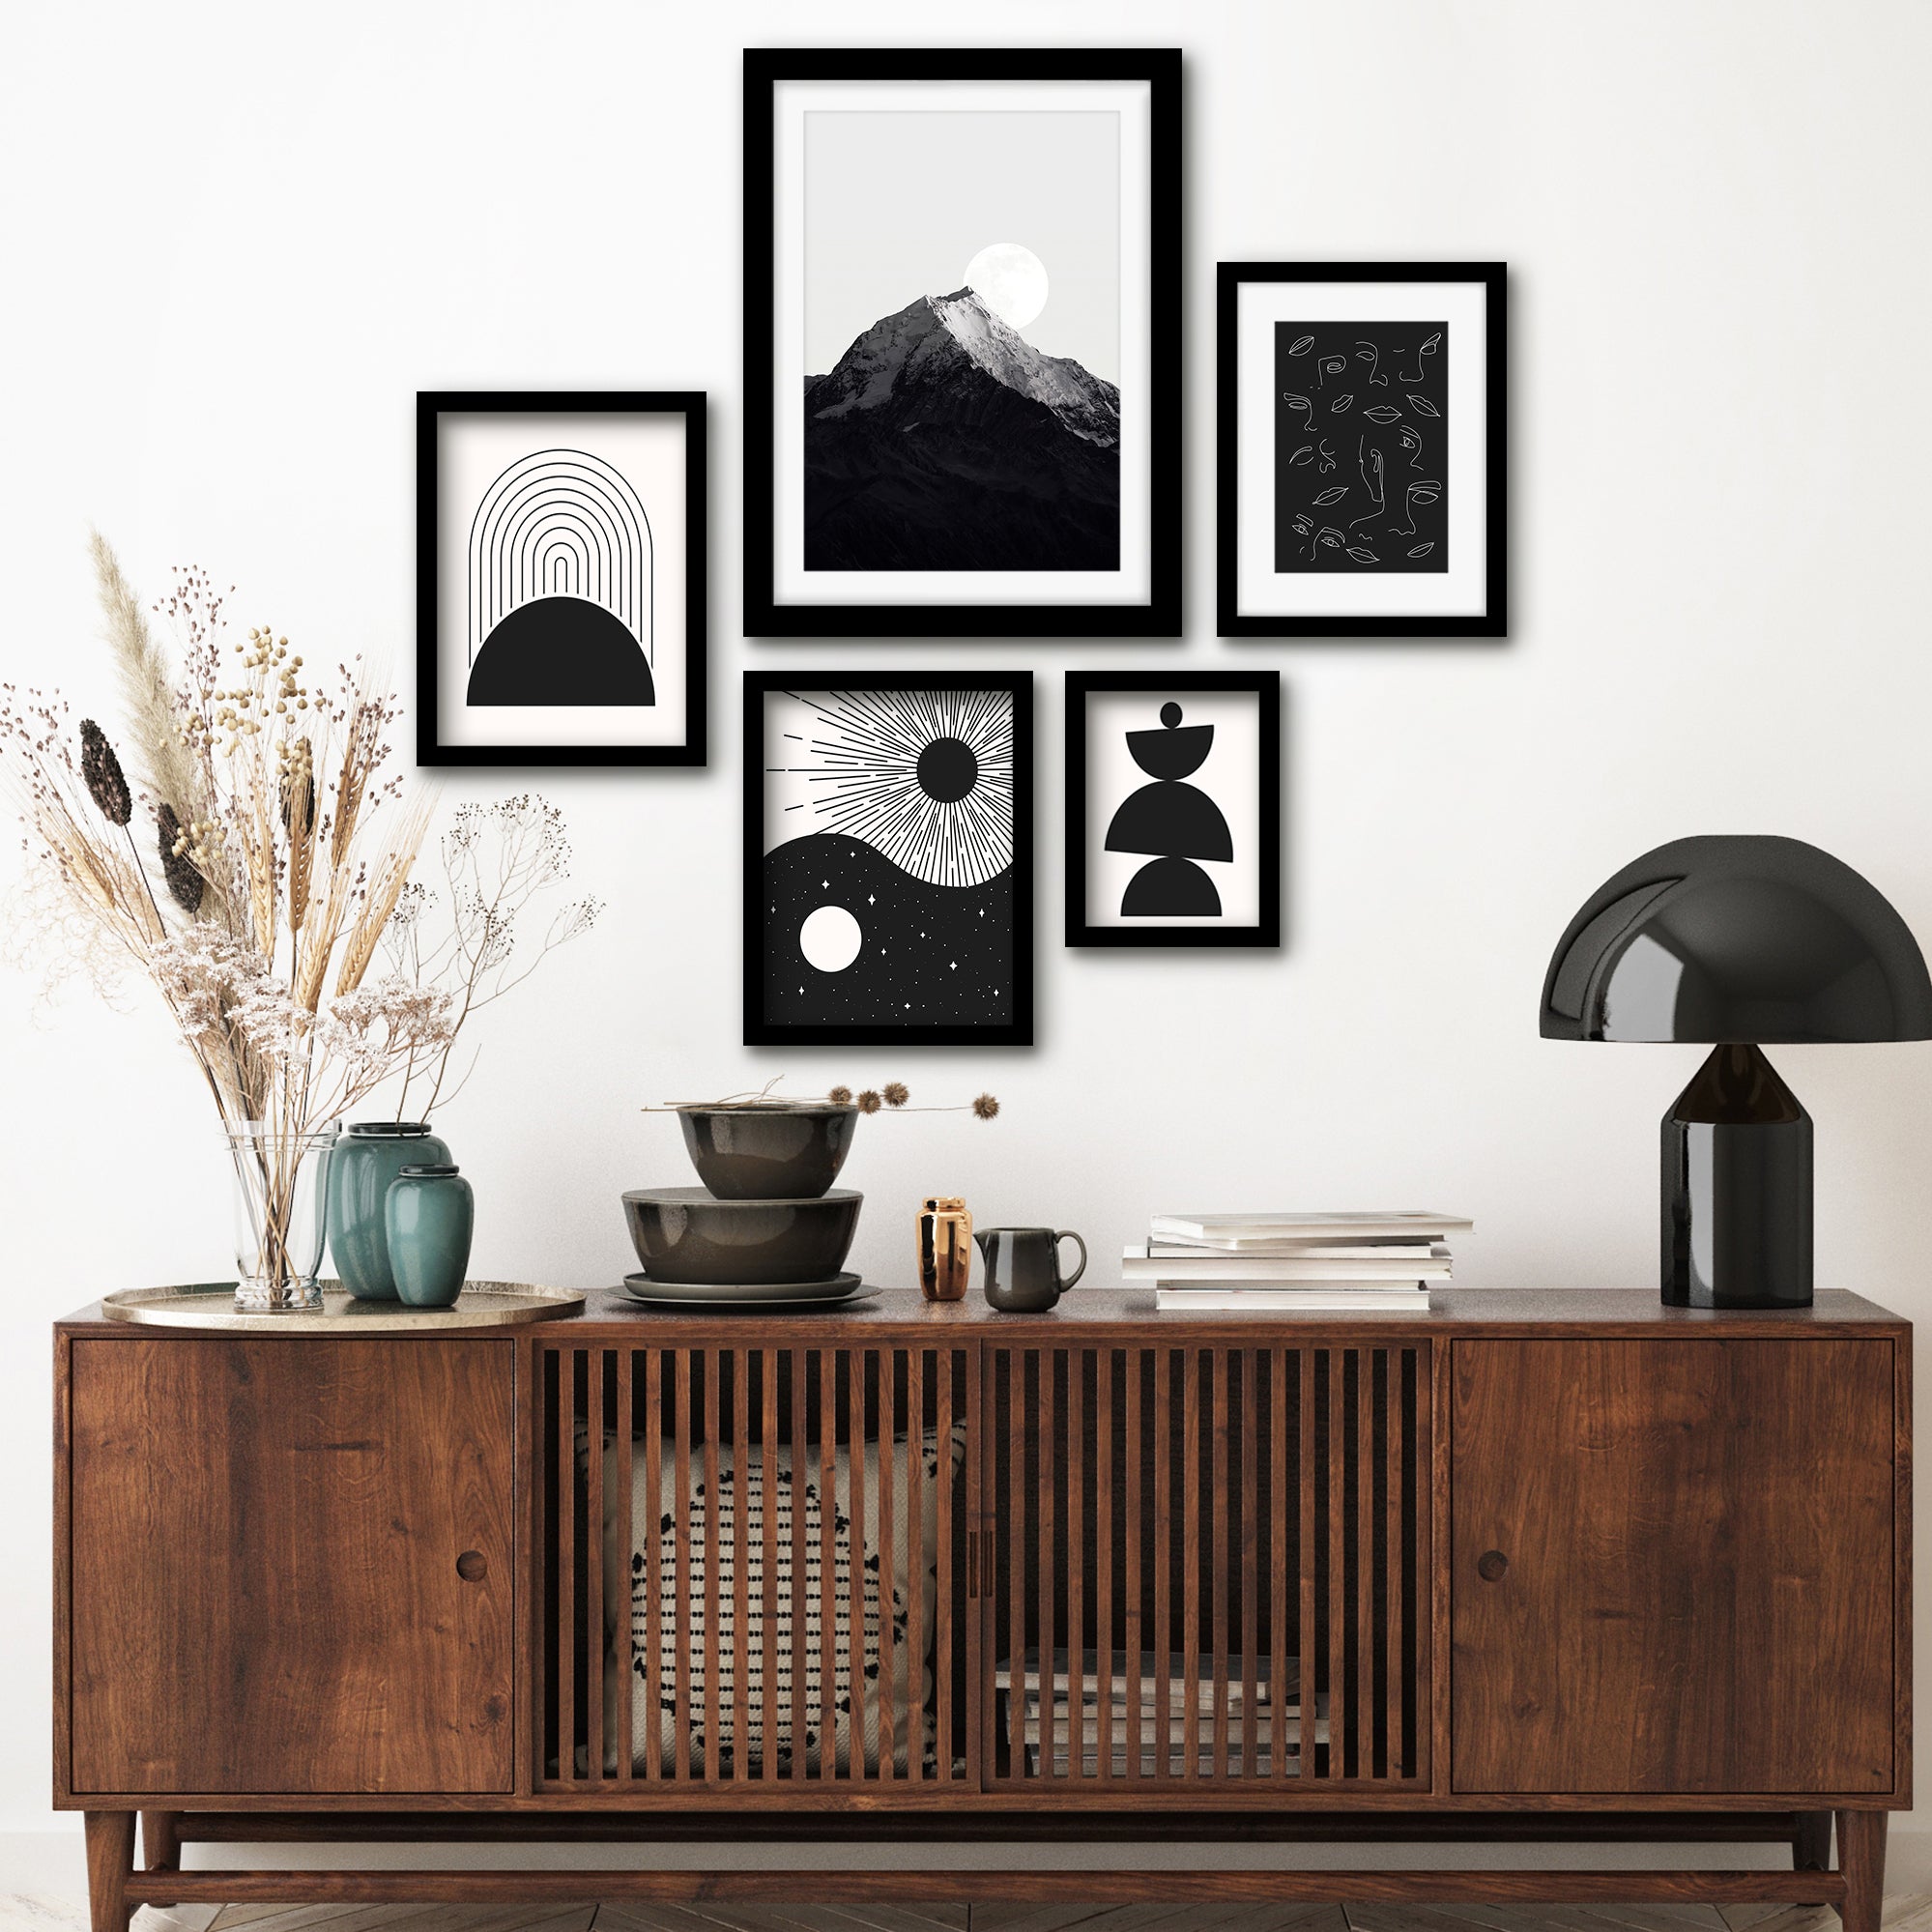 Stylish Art Prints for Your Home | Americanflat